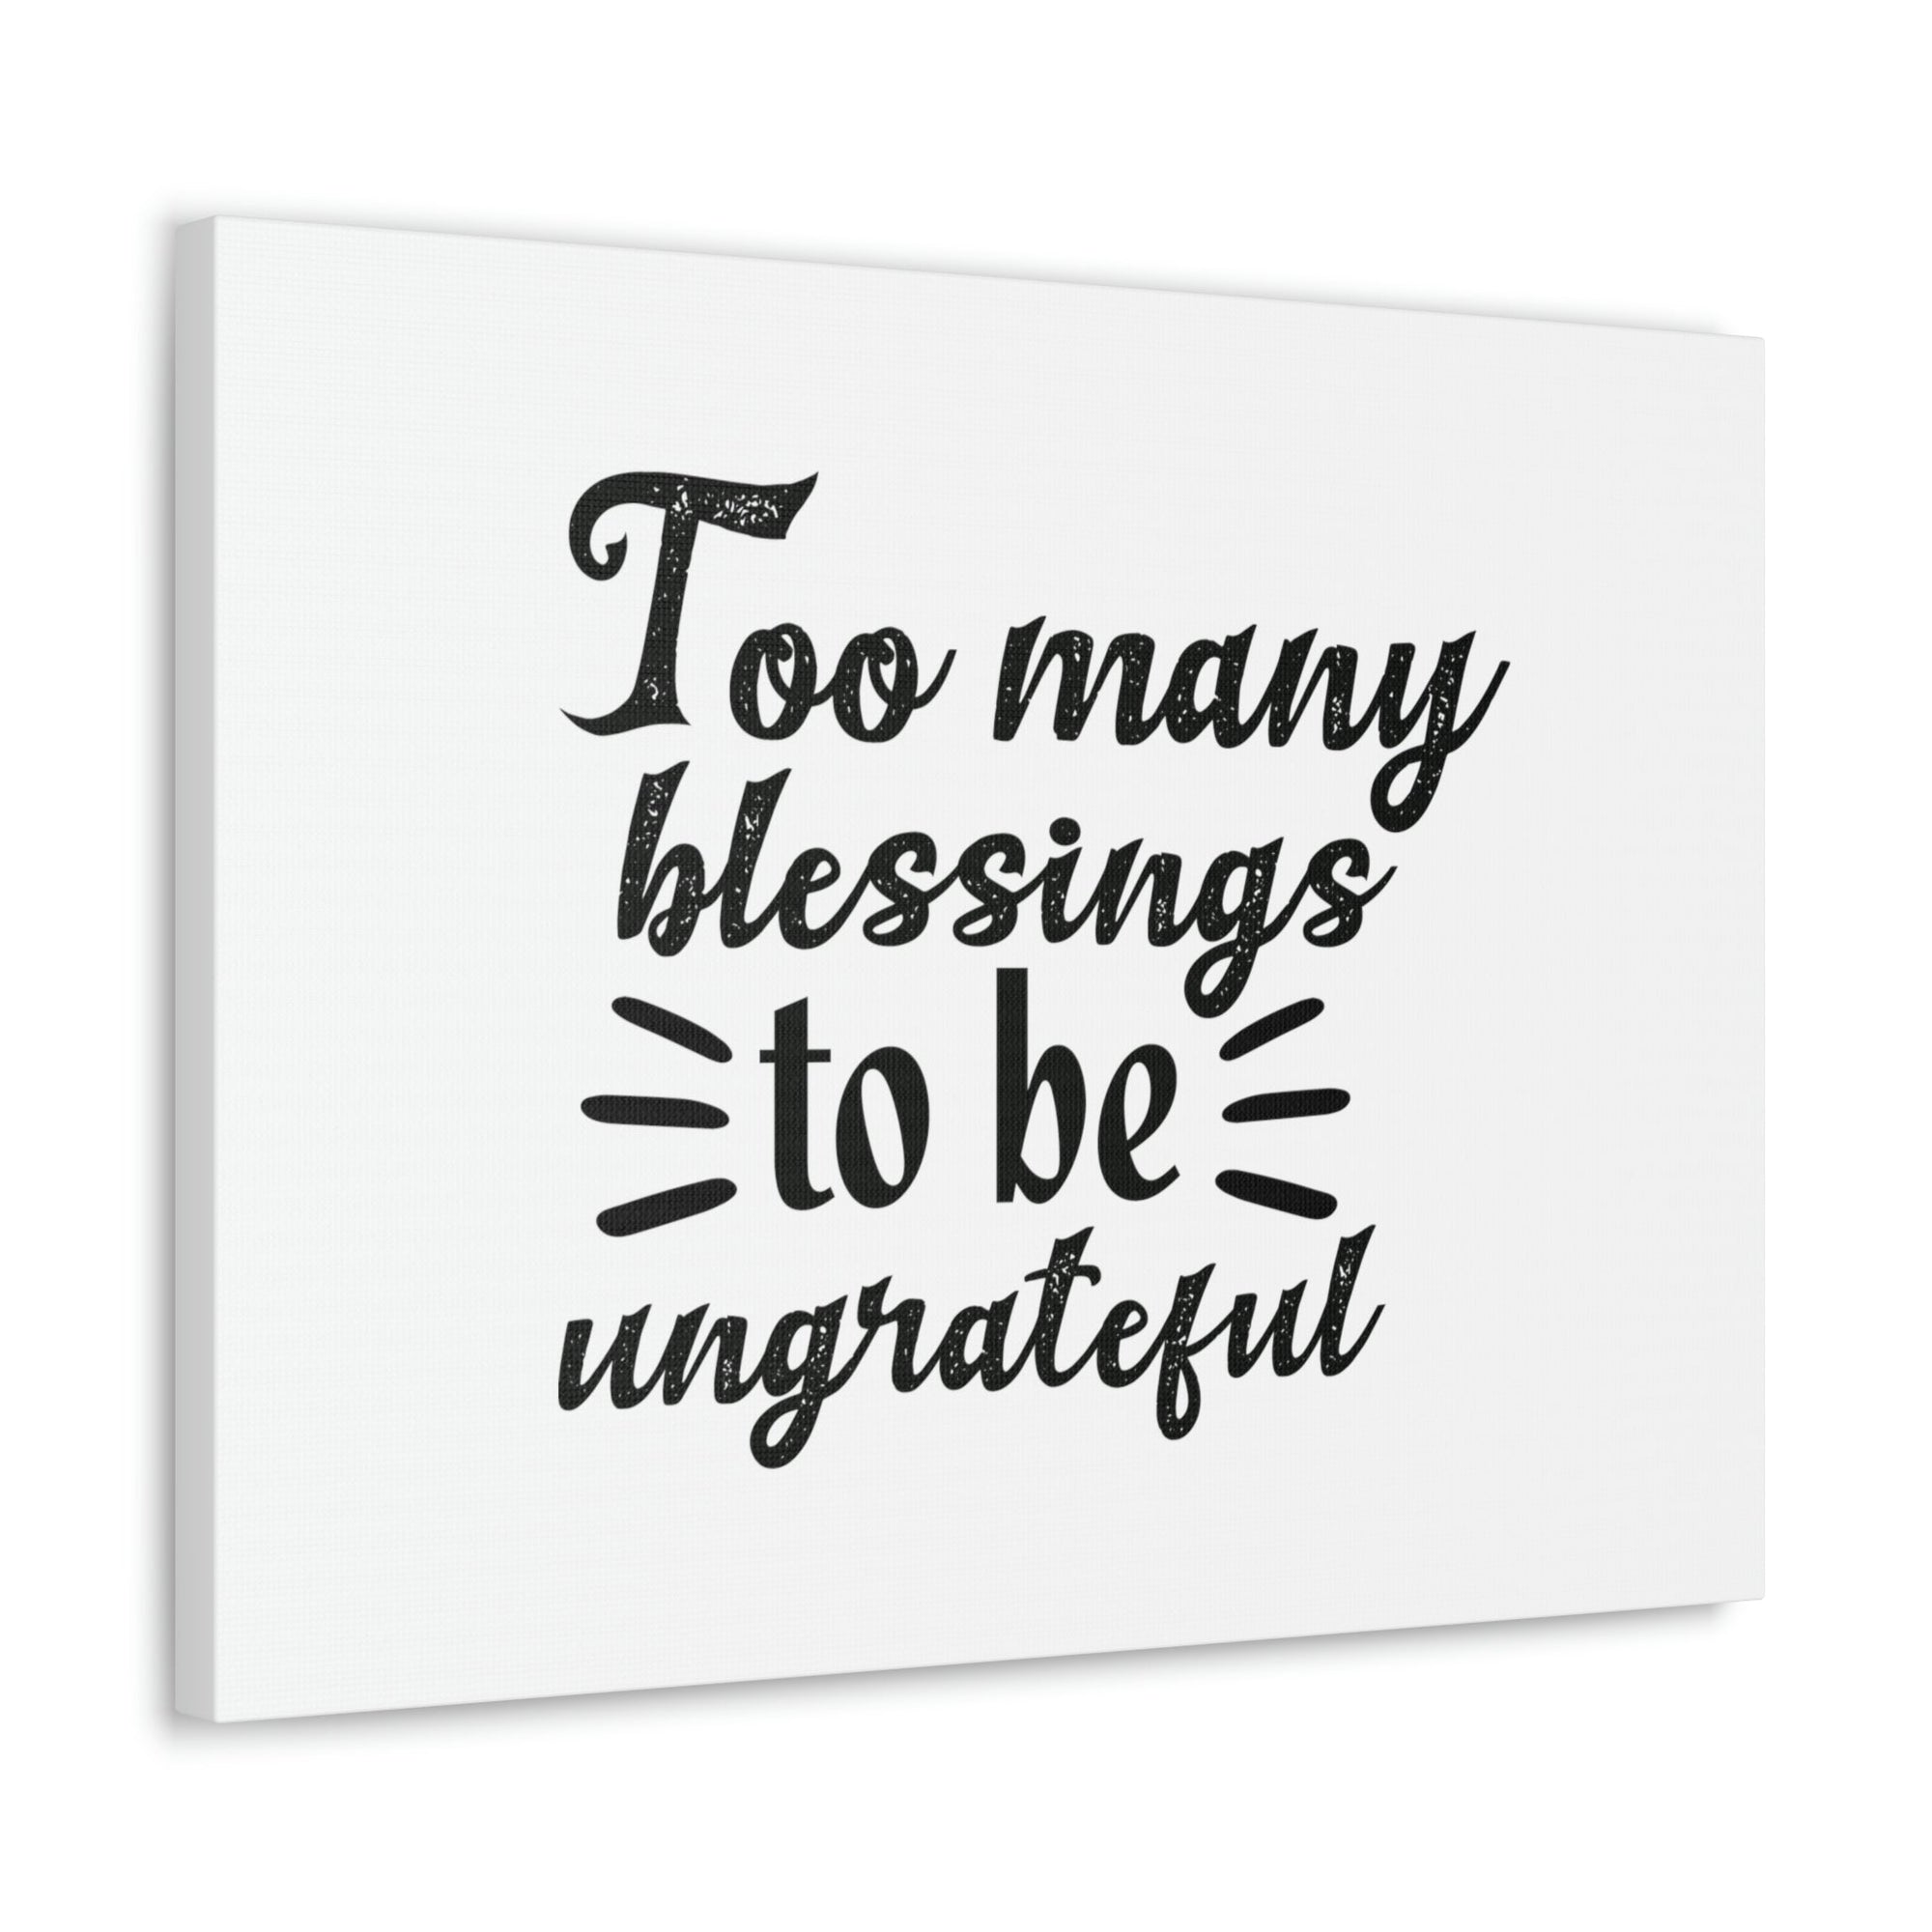 Scripture Walls Many Blessings Hebrews 12:28 Christian Wall Art Bible Verse Print Ready to Hang Unframed-Express Your Love Gifts